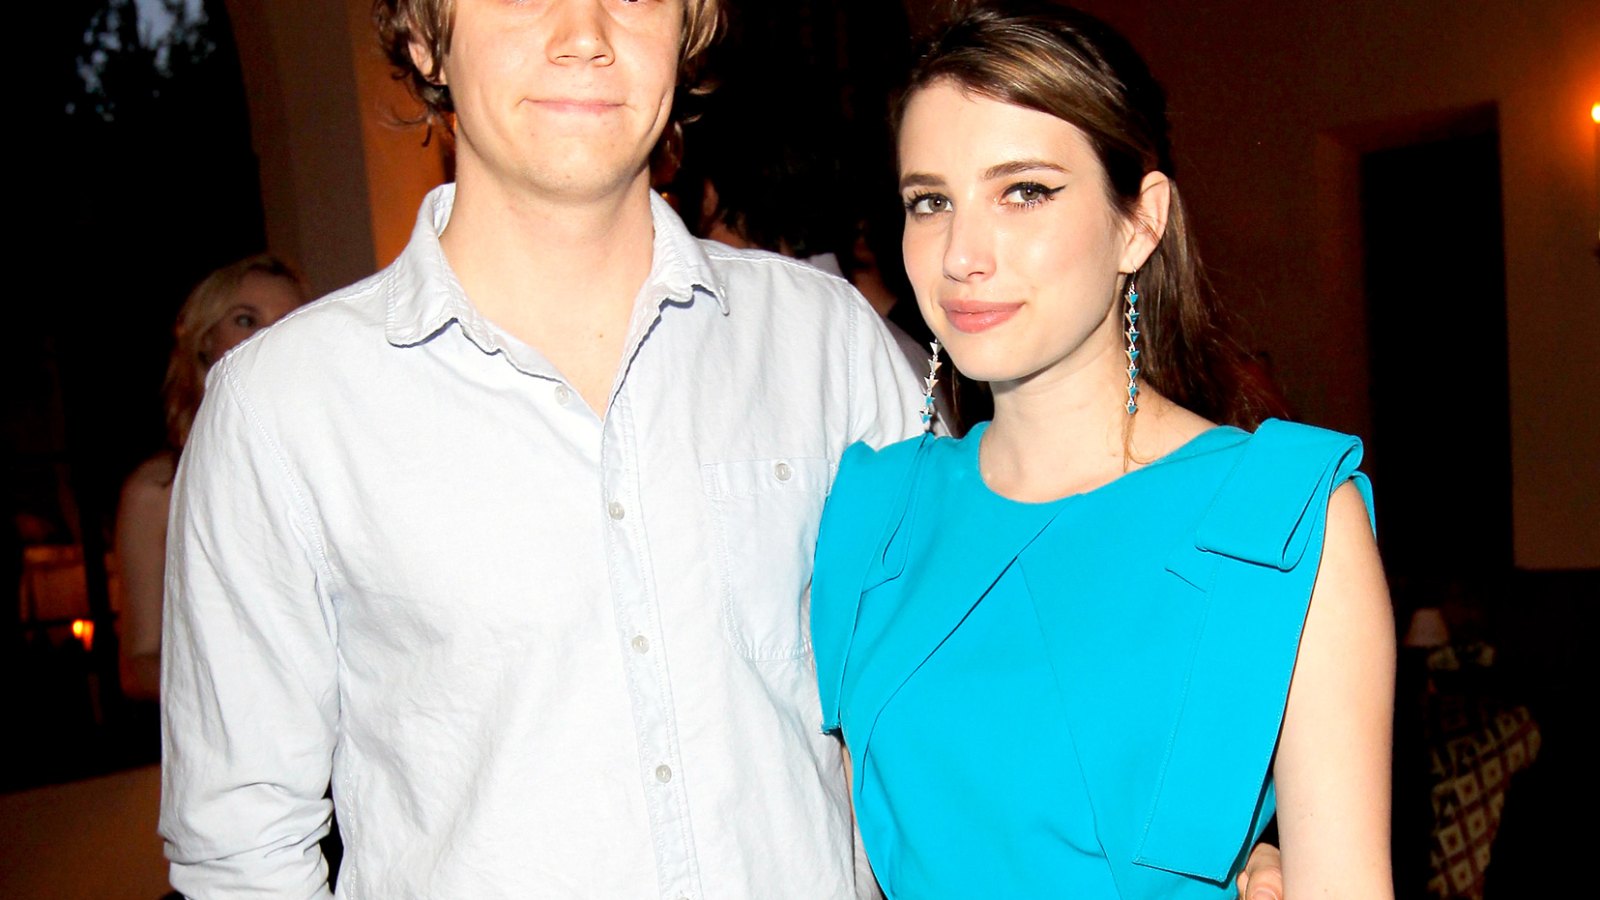 Evan Peters and Emma Roberts have an "extreme," "passionate" romance